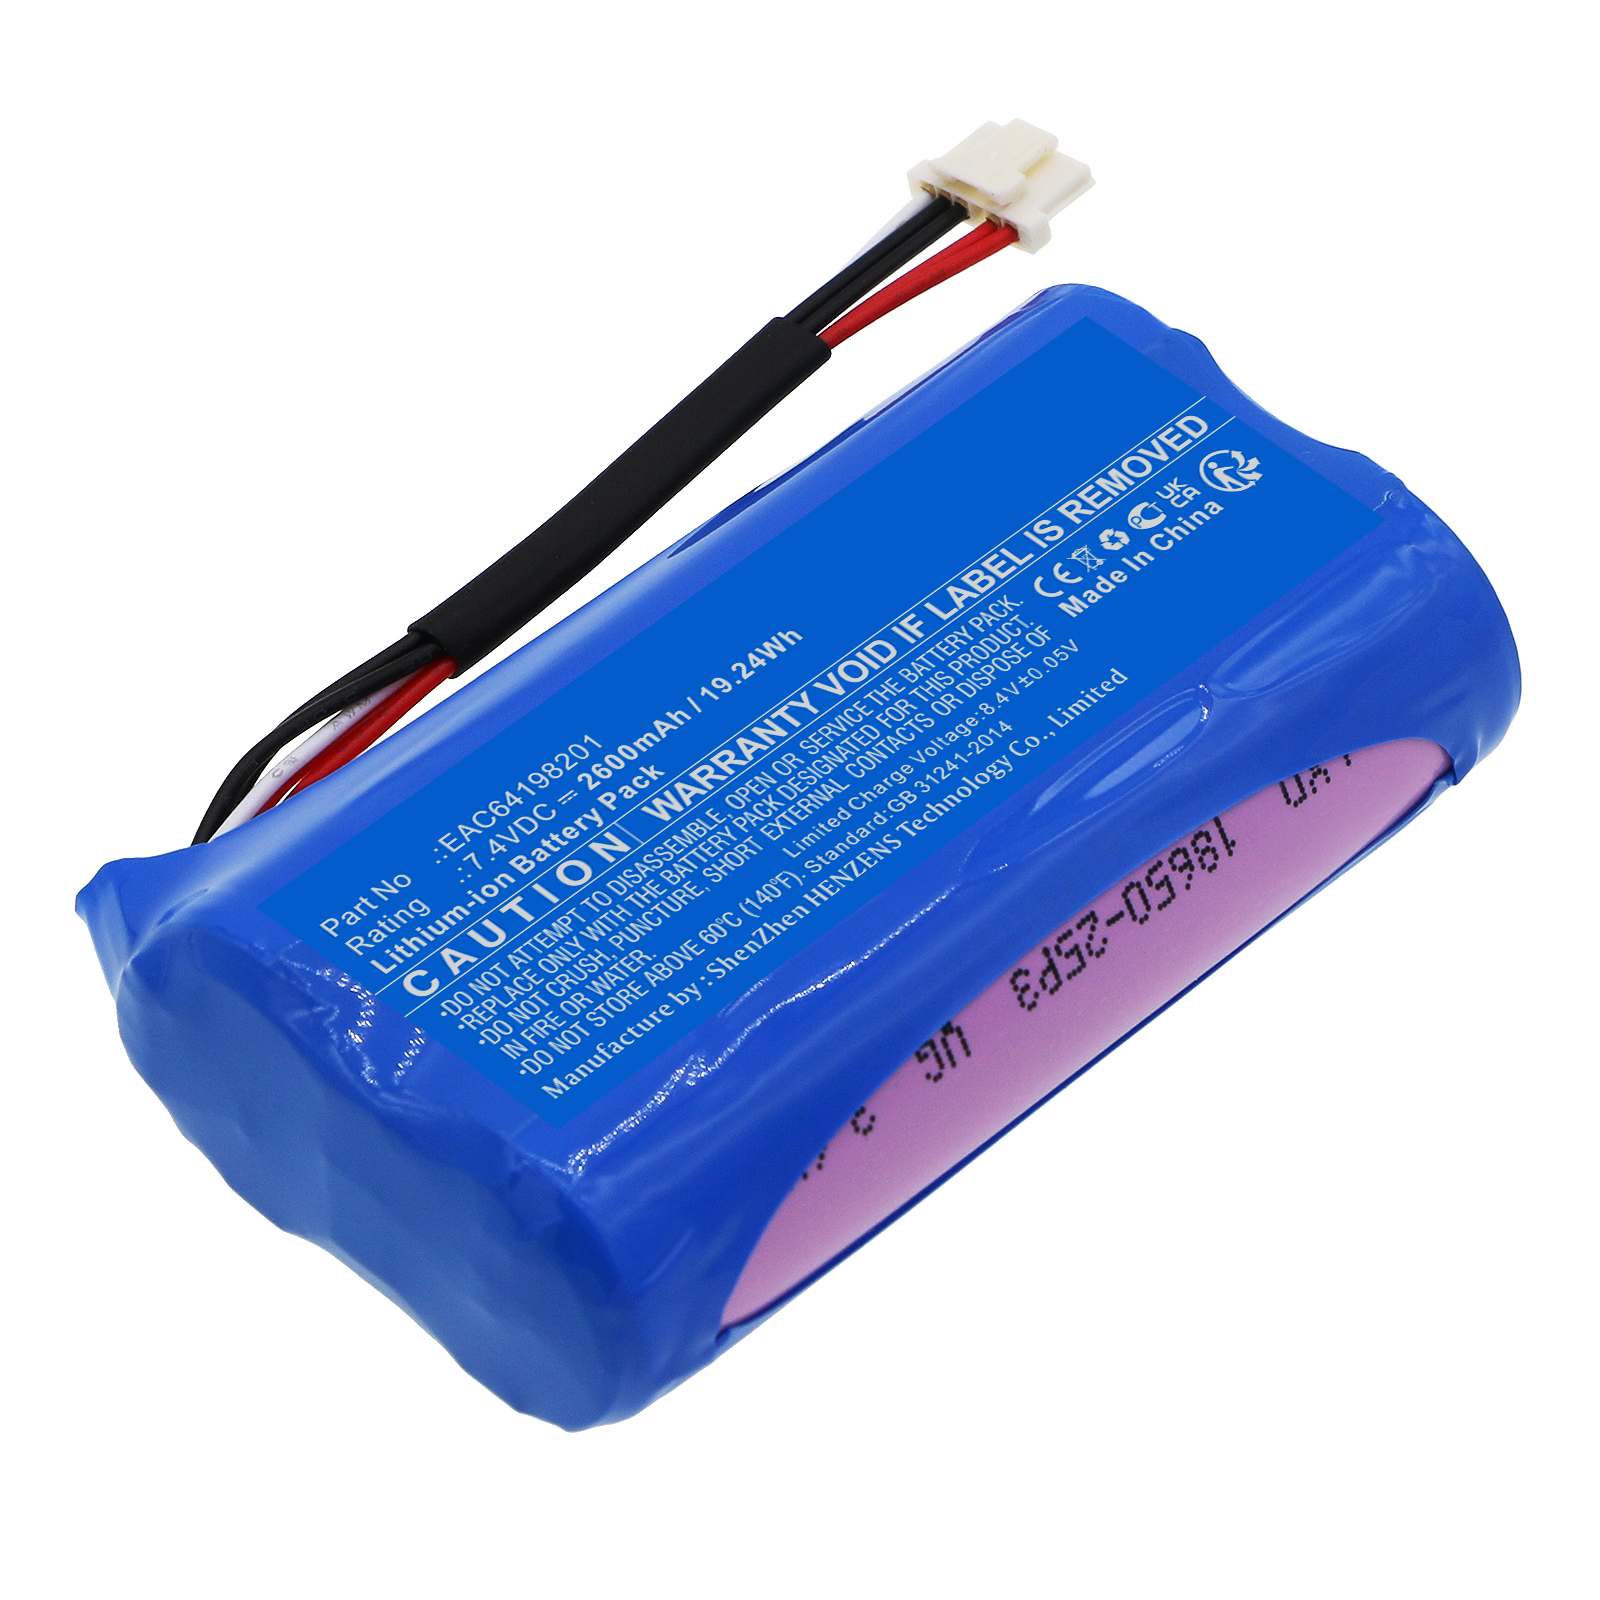 Synergy Digital Projector Battery, Compatible with LG EAC64198201 Projector Battery (Li-ion, 7.4V, 2600mAh)